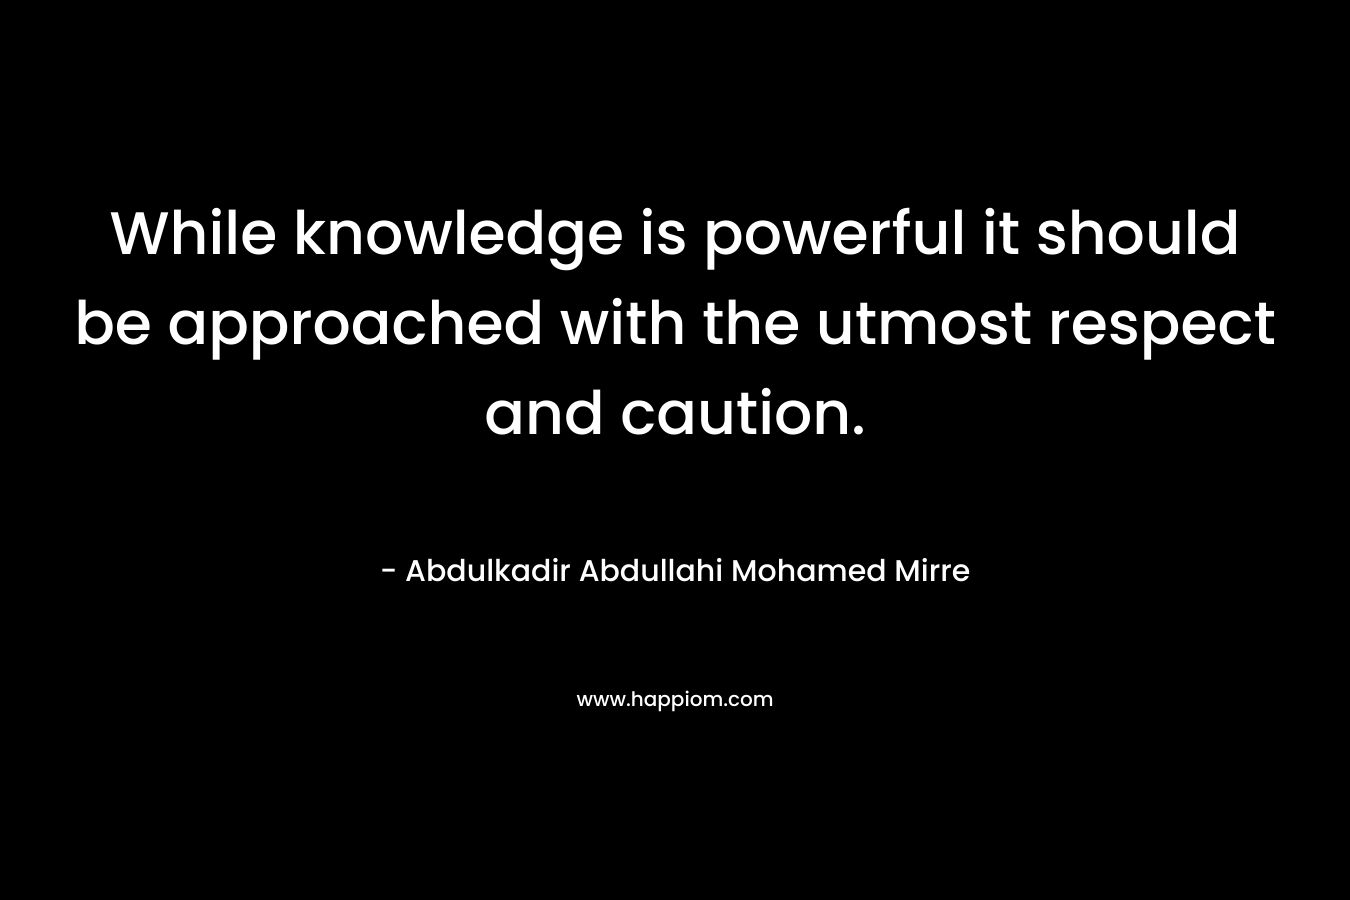 While knowledge is powerful it should be approached with the utmost respect and caution. – Abdulkadir Abdullahi Mohamed Mirre